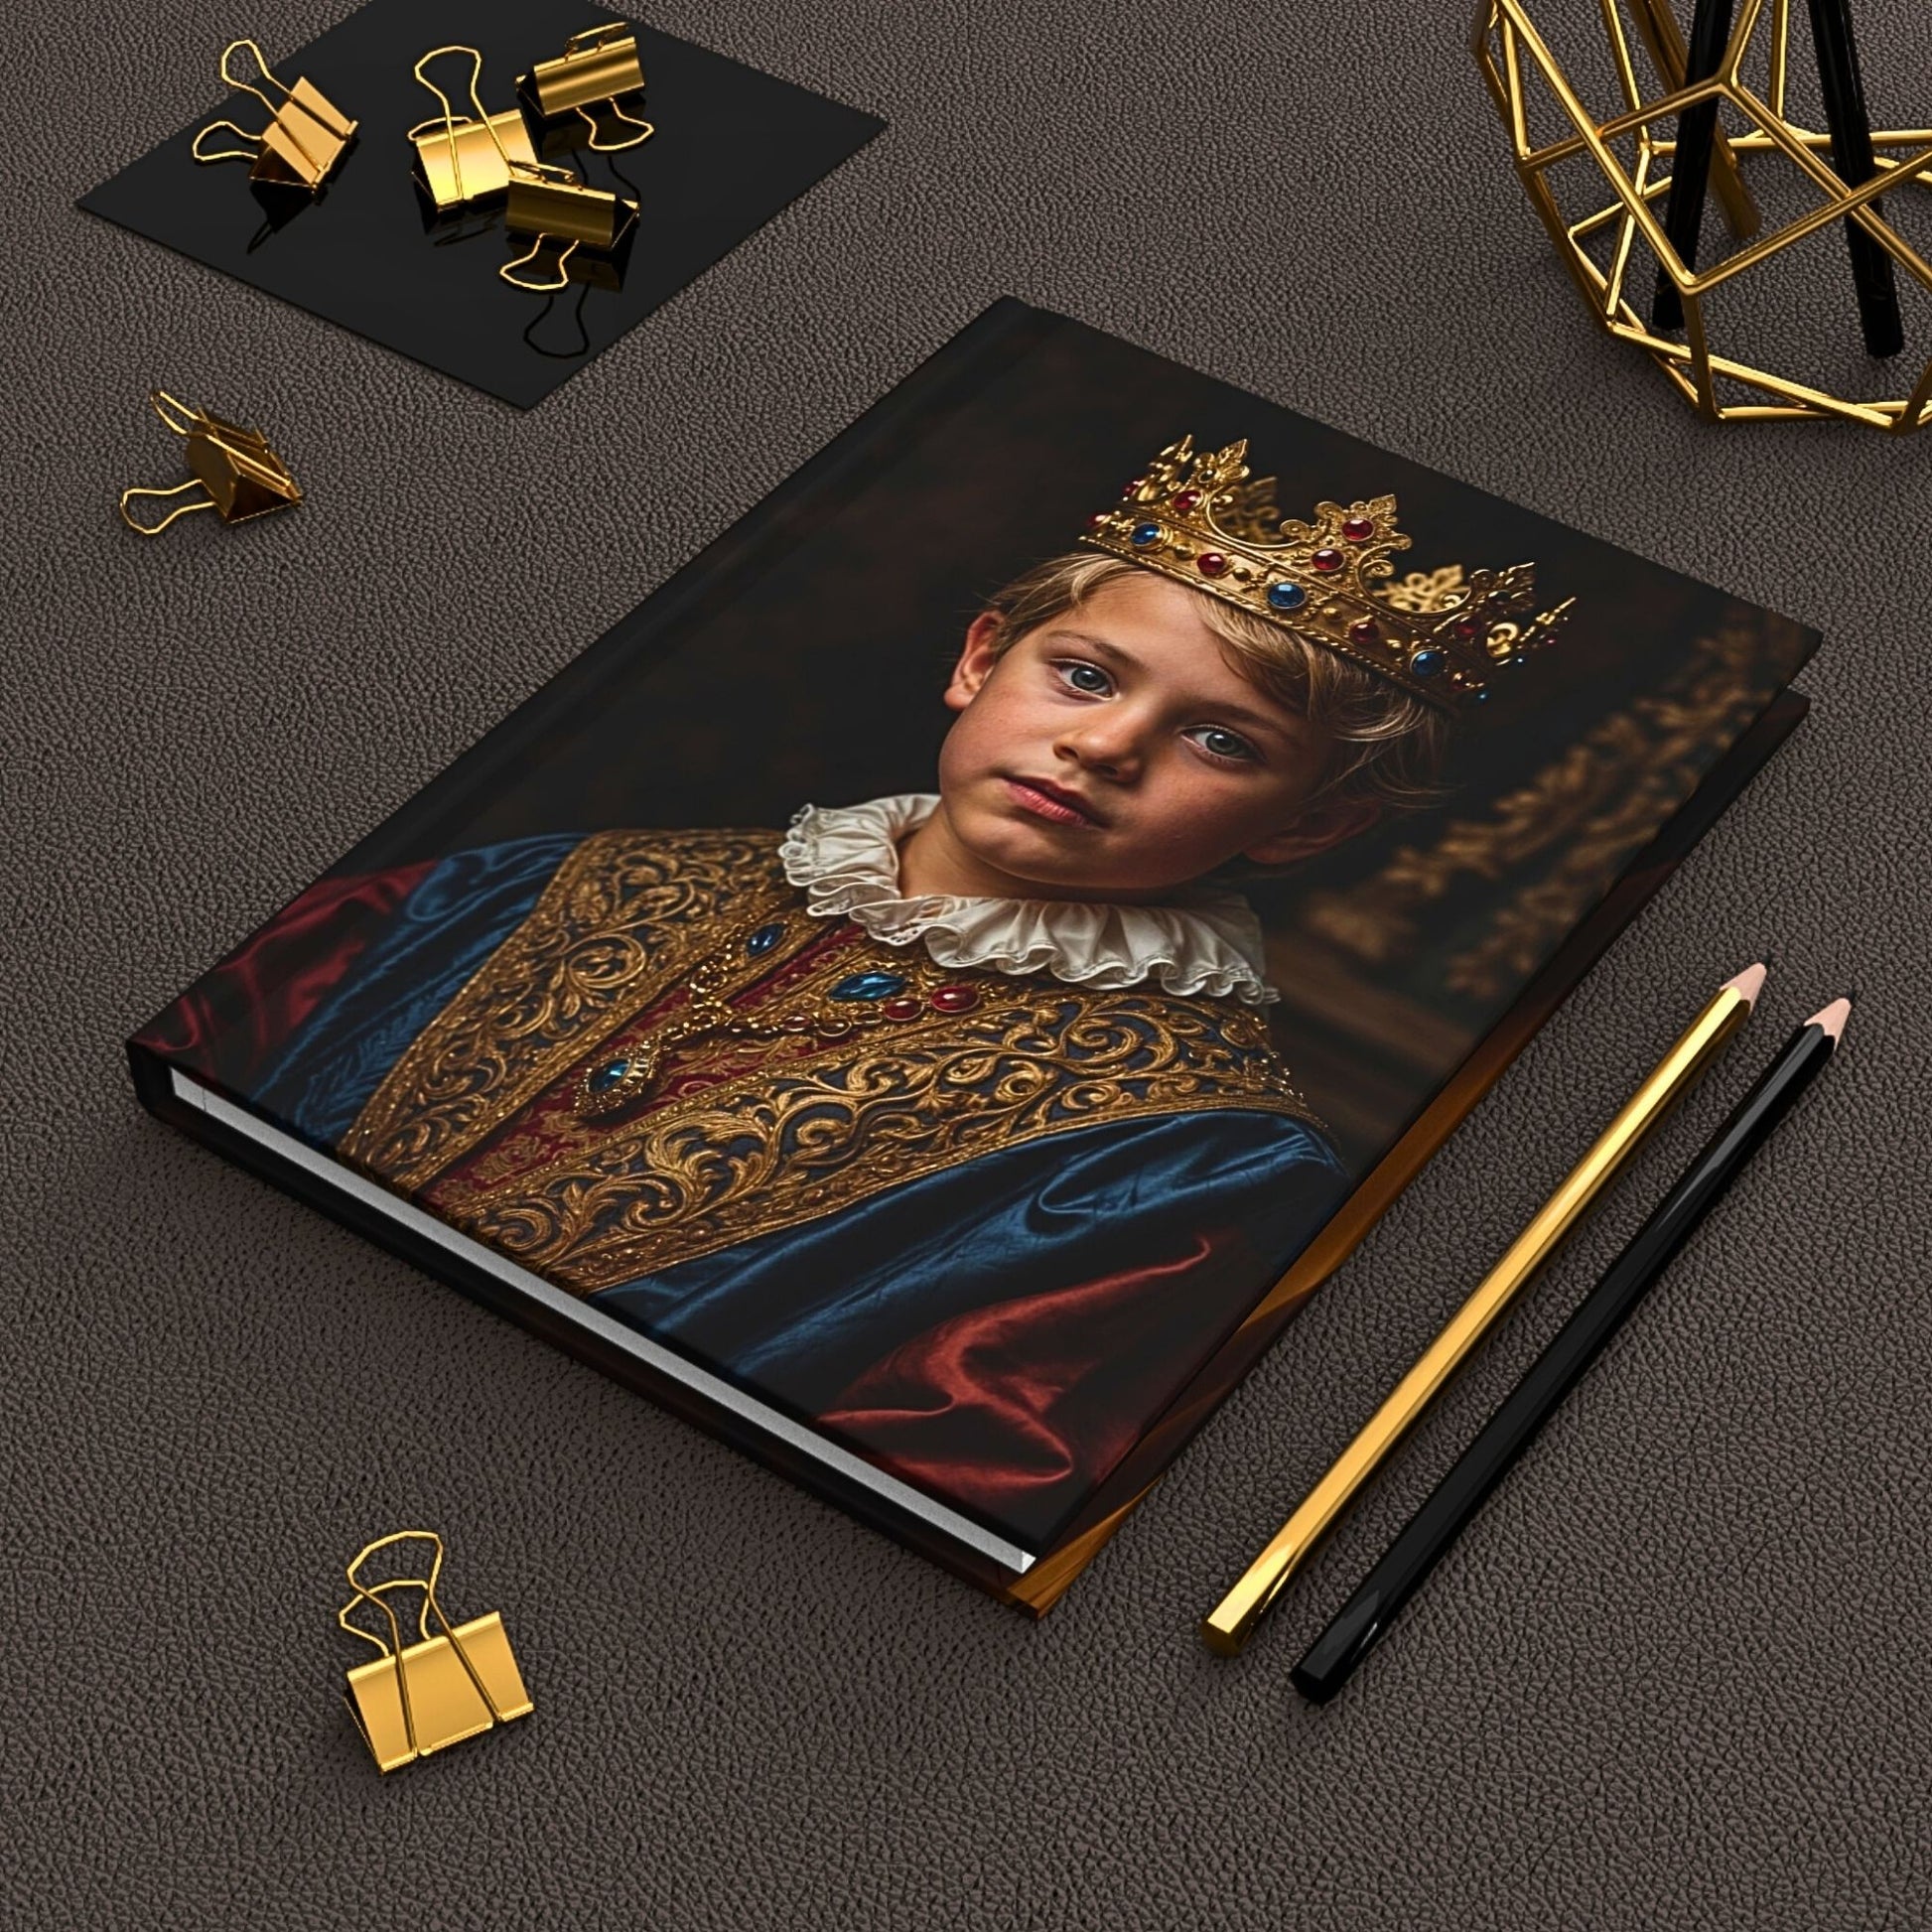 our exquisite Custom Kids Royal Journal from Photo, where ordinary photographs are transformed into extraordinary keepsakes. This personalized journal combines the artistry of portrait photography with the elegance of historical royal manuscripts, creating a stunning homage to your child’s uniqueness.